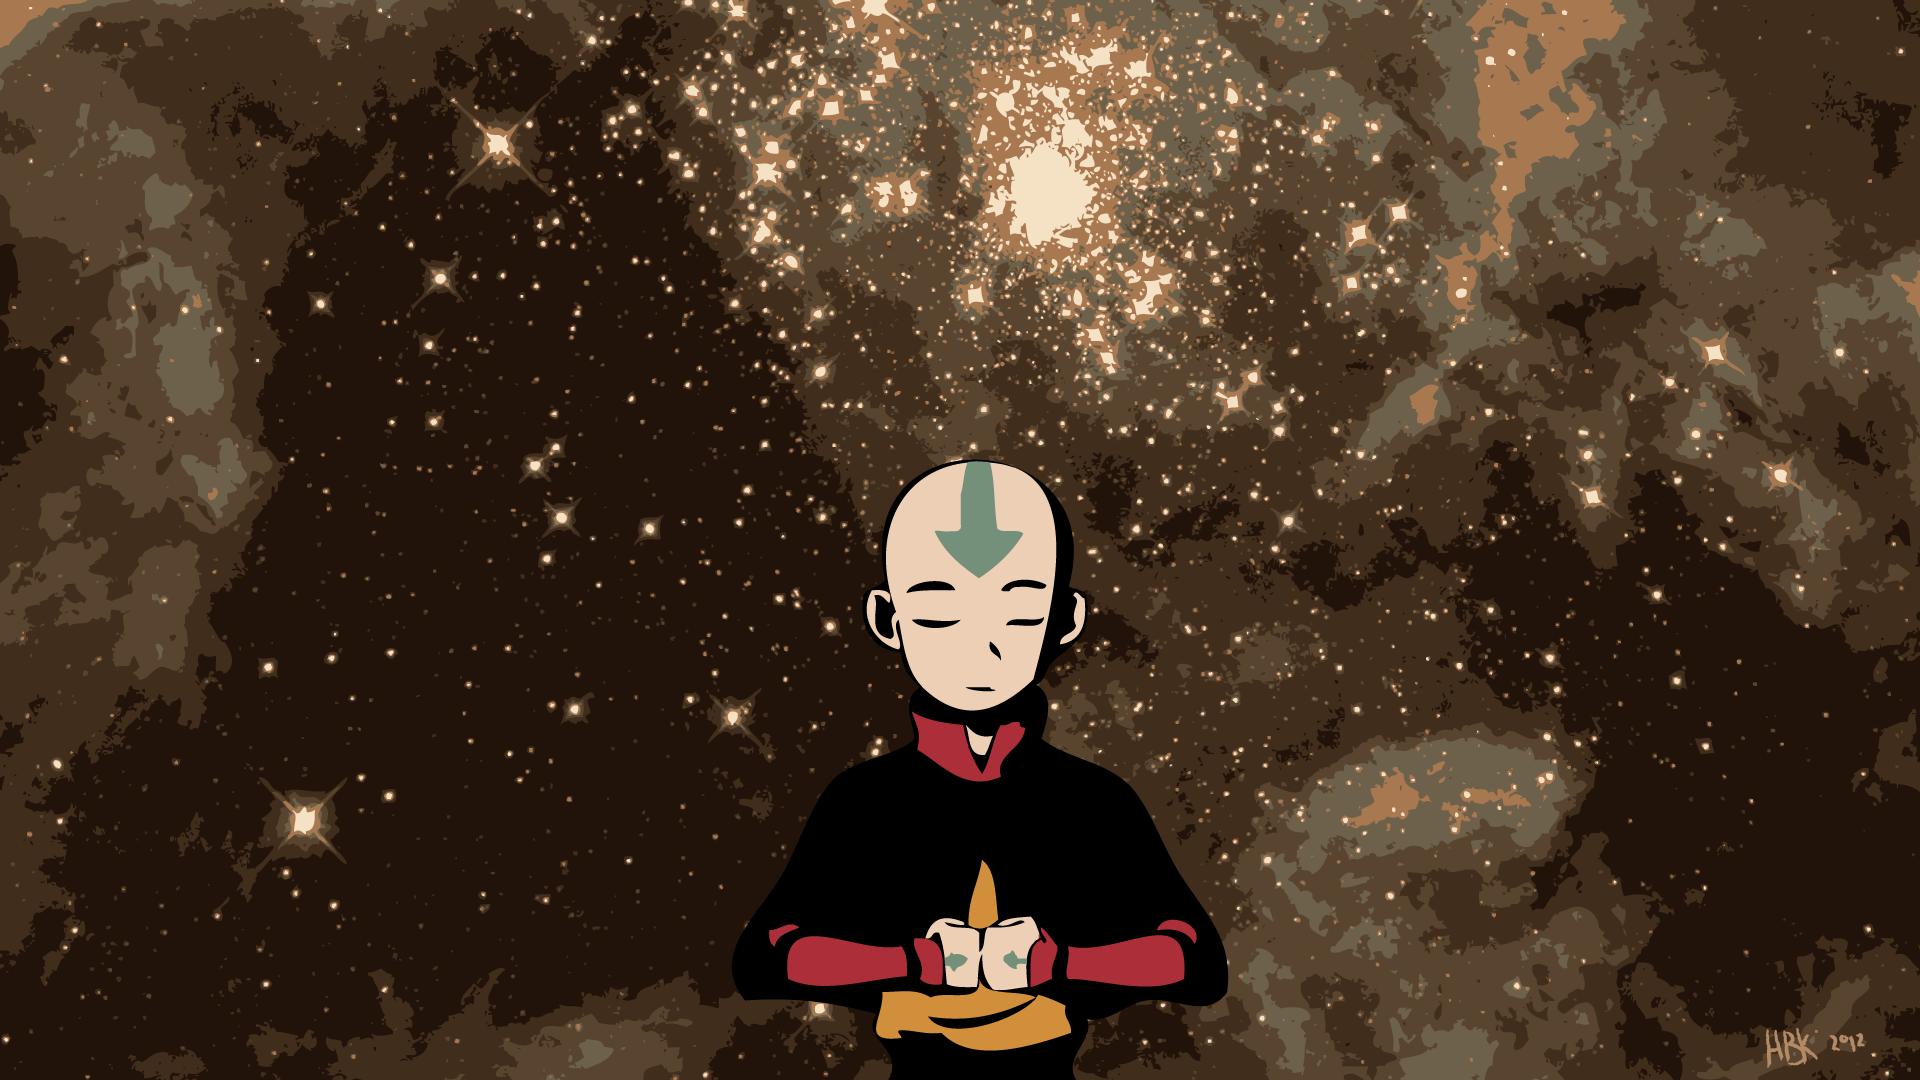 Avatar The Last Airbender HD Wallpapers - Page 2